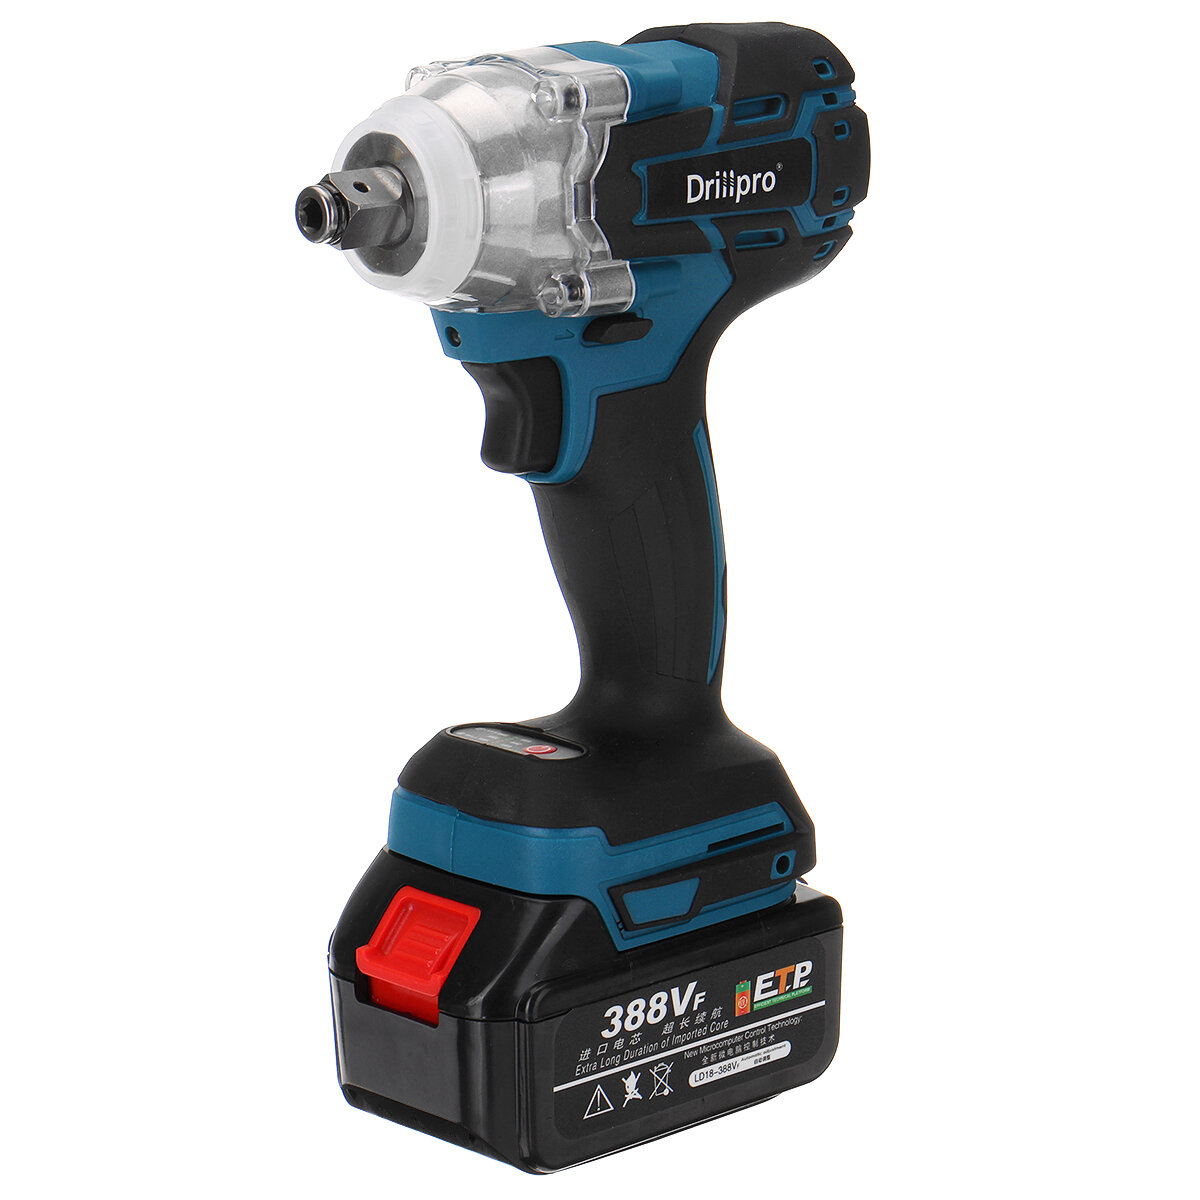 Drillpro 388VF 520N.m Brushless Electric Cordless Impact Wrench 1/2 inch Drill Driver Power Tool For Home For Makita 18V Battery